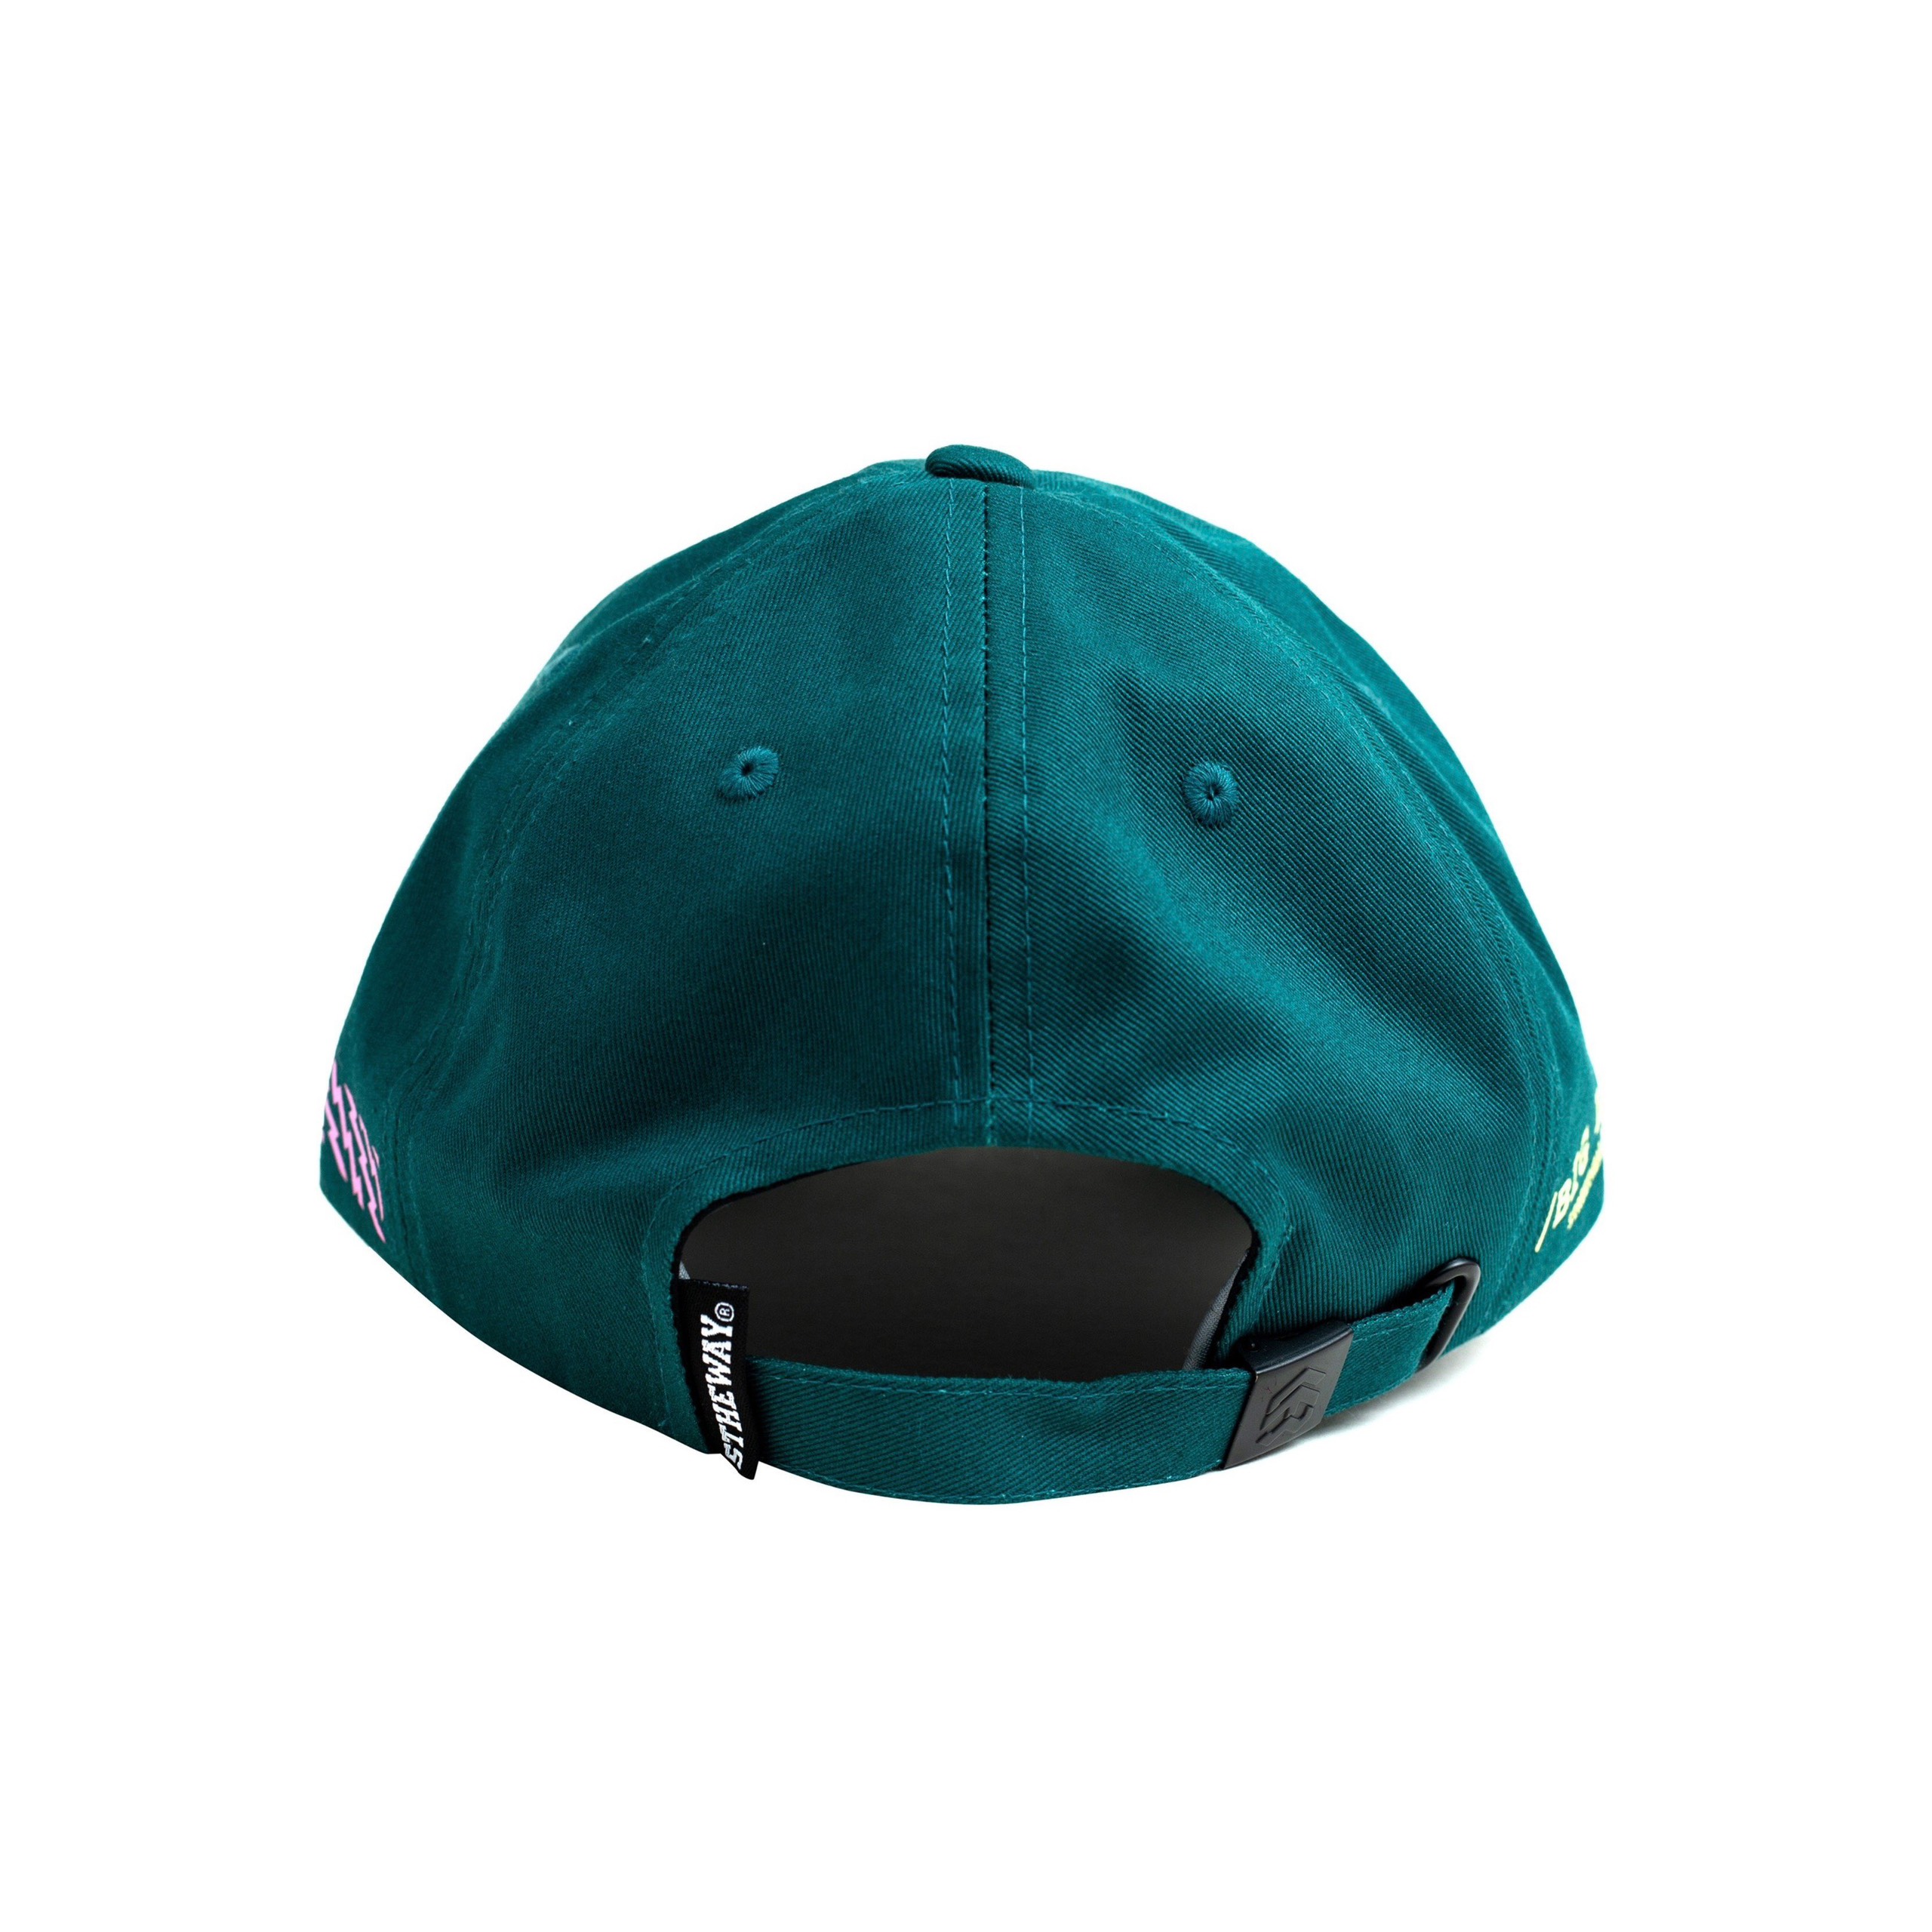 Nón Lưỡi Trai 5THEWAY Xanh Lá aka 5THEWAY /oval/ Unstructure Washed Dad Cap in STORM